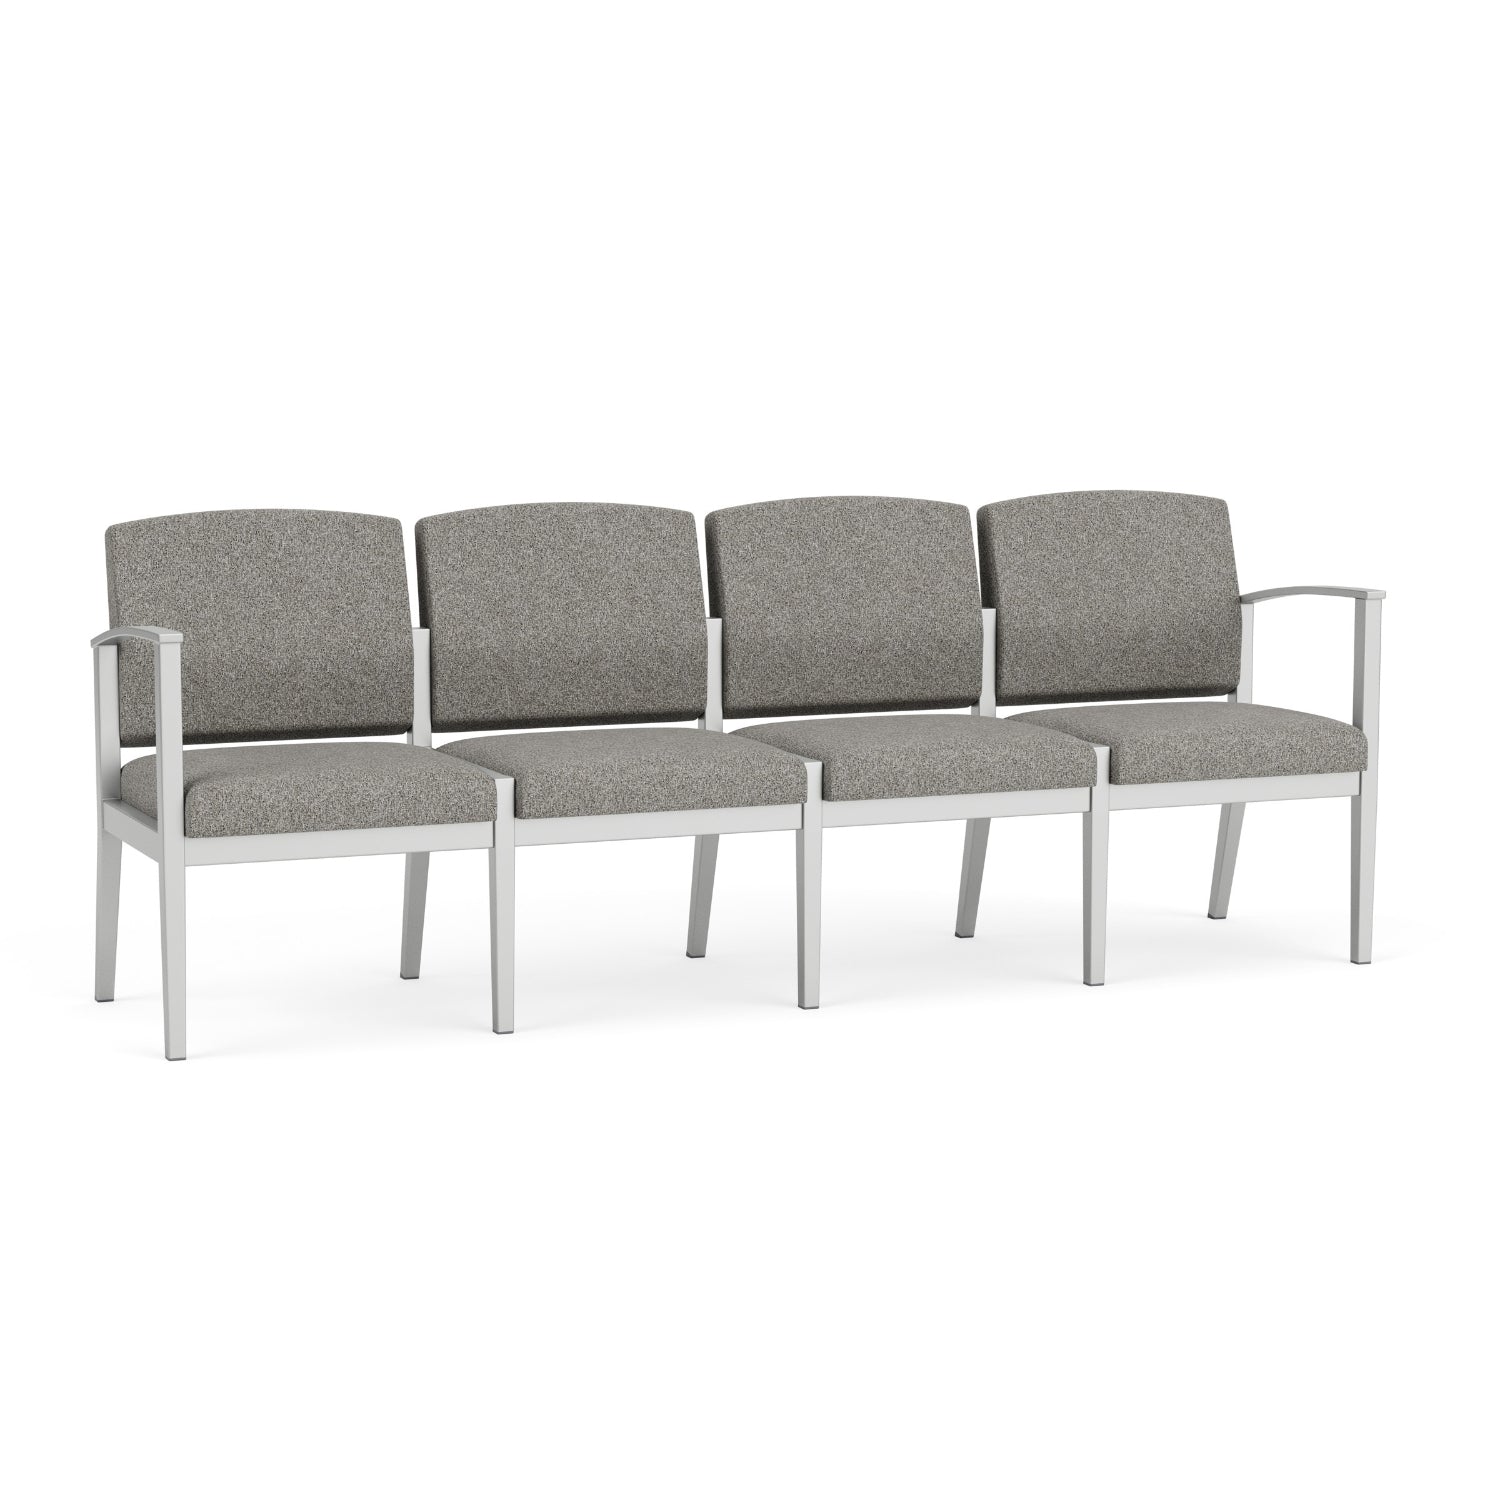 Amherst Steel Collection Reception Seating, 4-Seat Sofa, Standard Fabric Upholstery, FREE SHIPPING